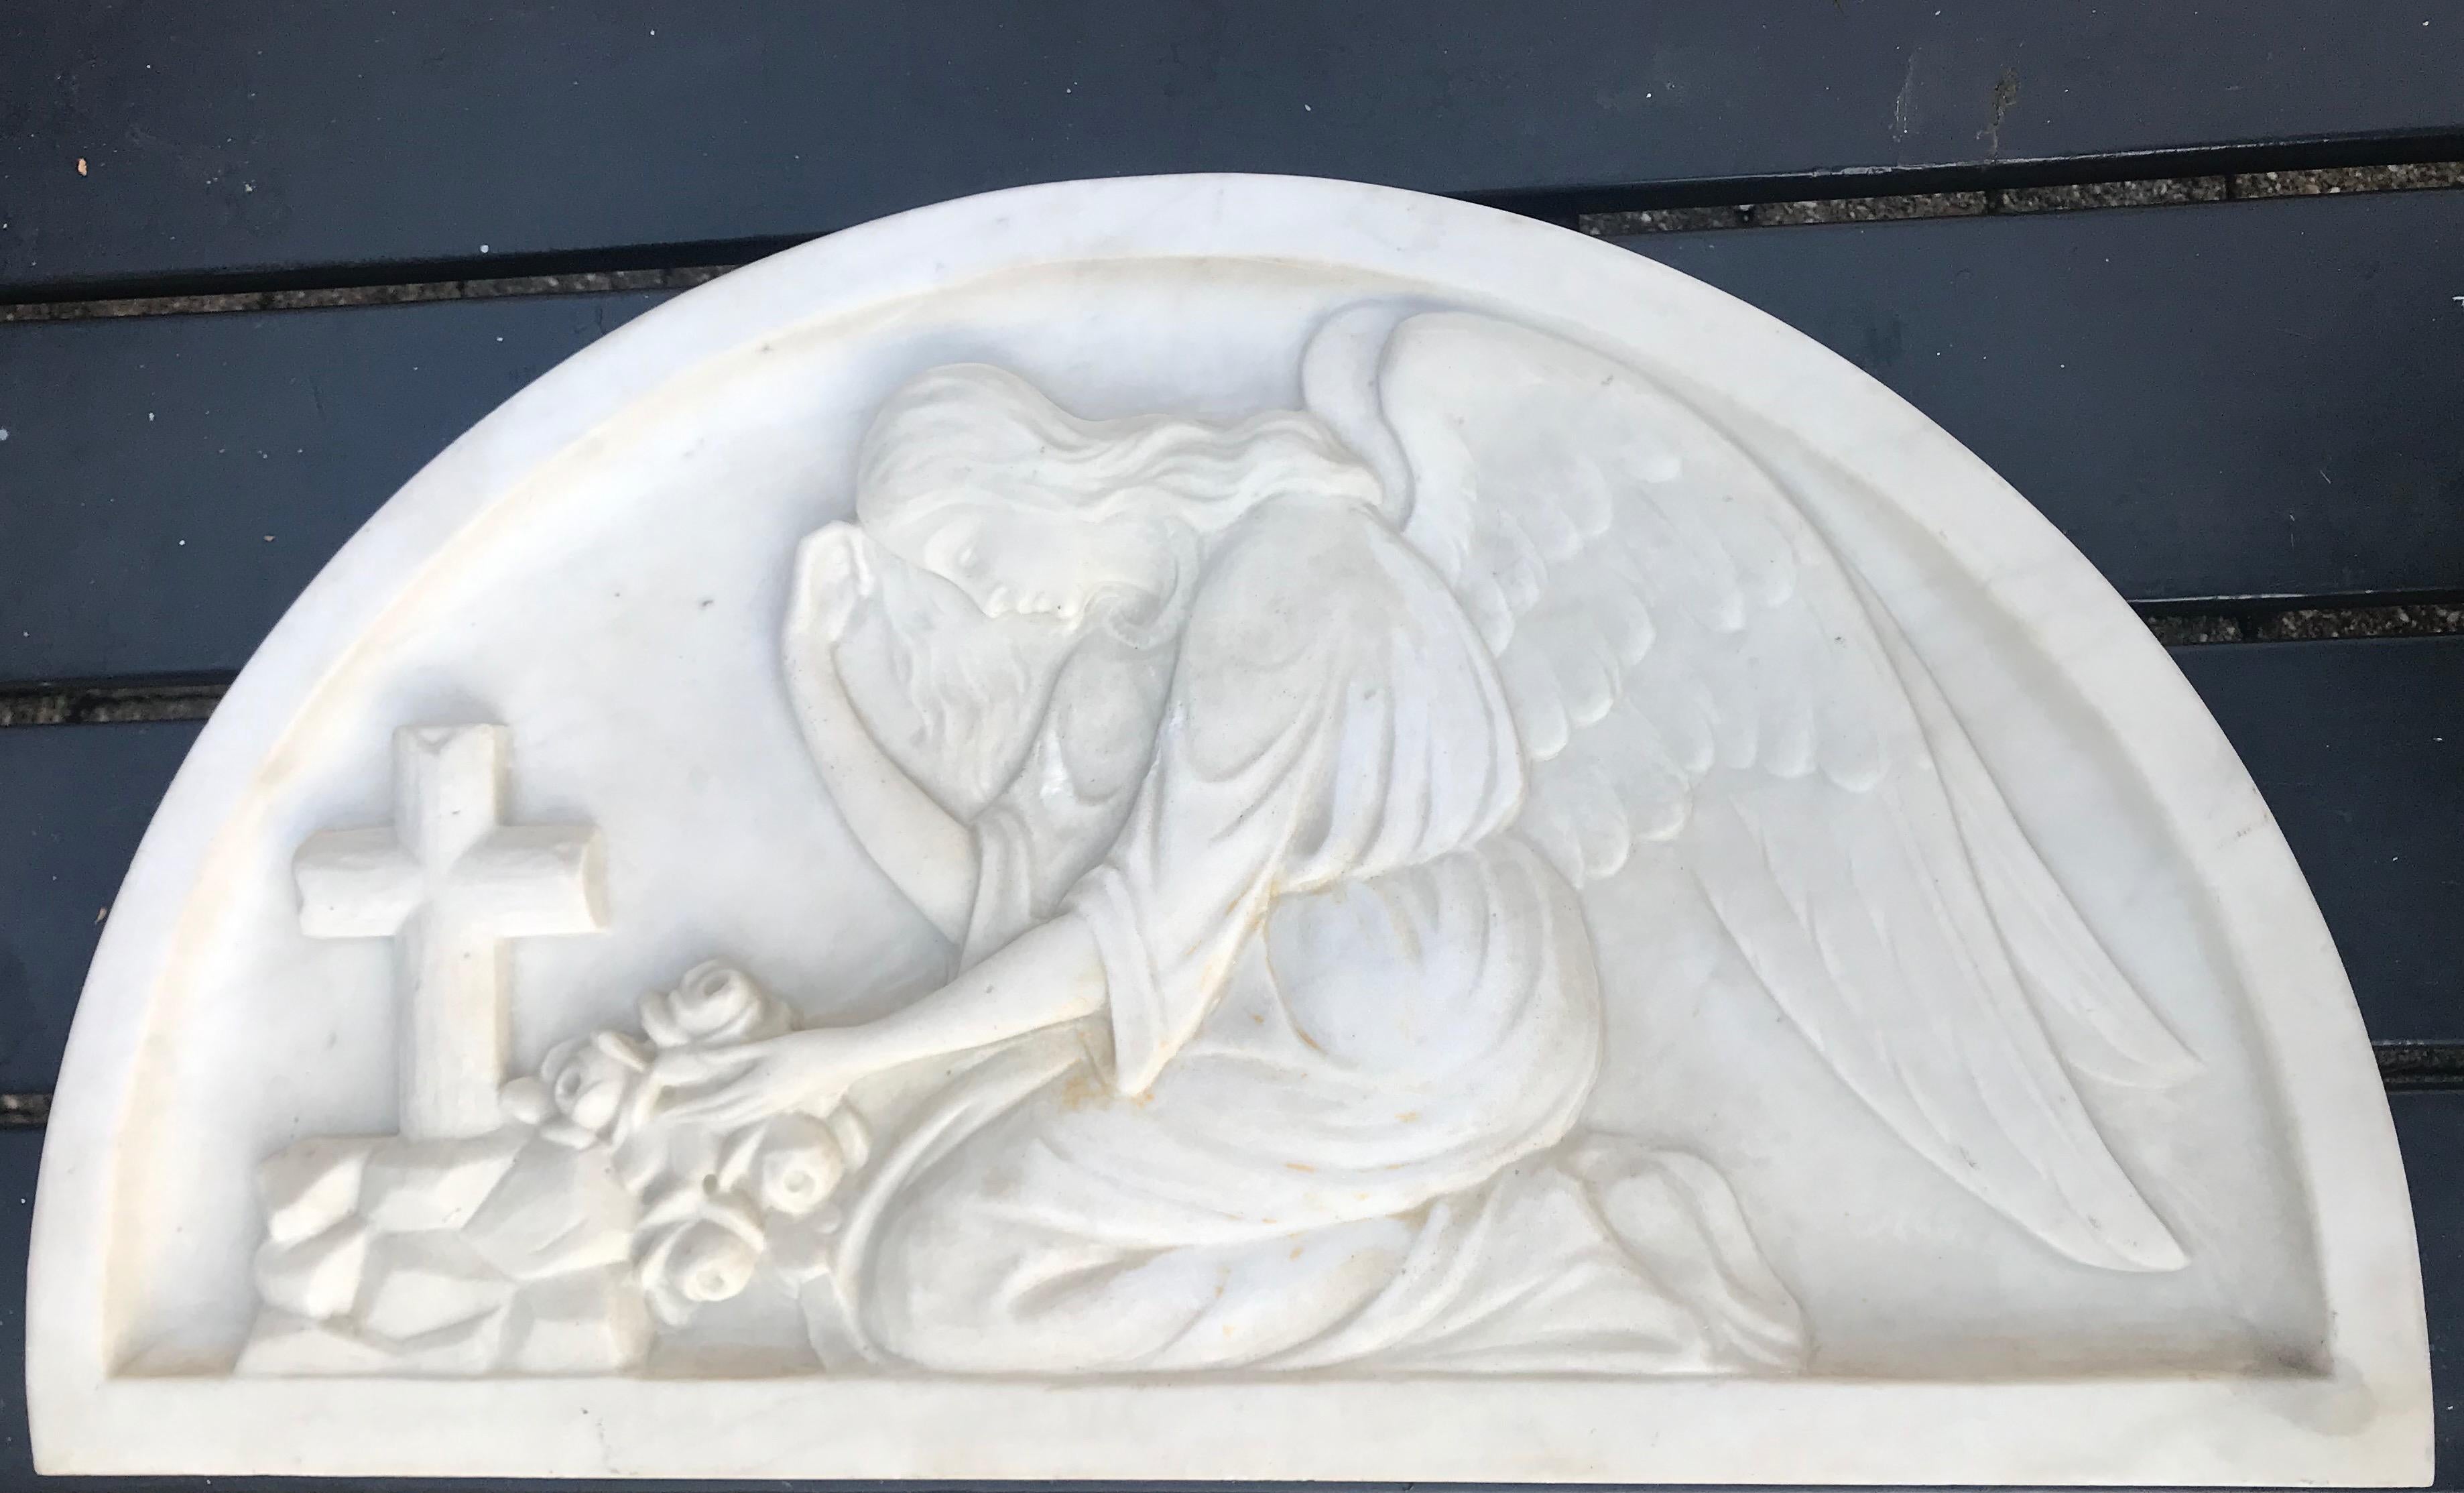 Hand-carved kneeling angel in relief. Marked/Signed picture 4.

This mourning angel by a grave is entirely hand-carved out of marble. This early 20th century Christian work of art can be used hanging on the wall or standing on a shelf. The natural